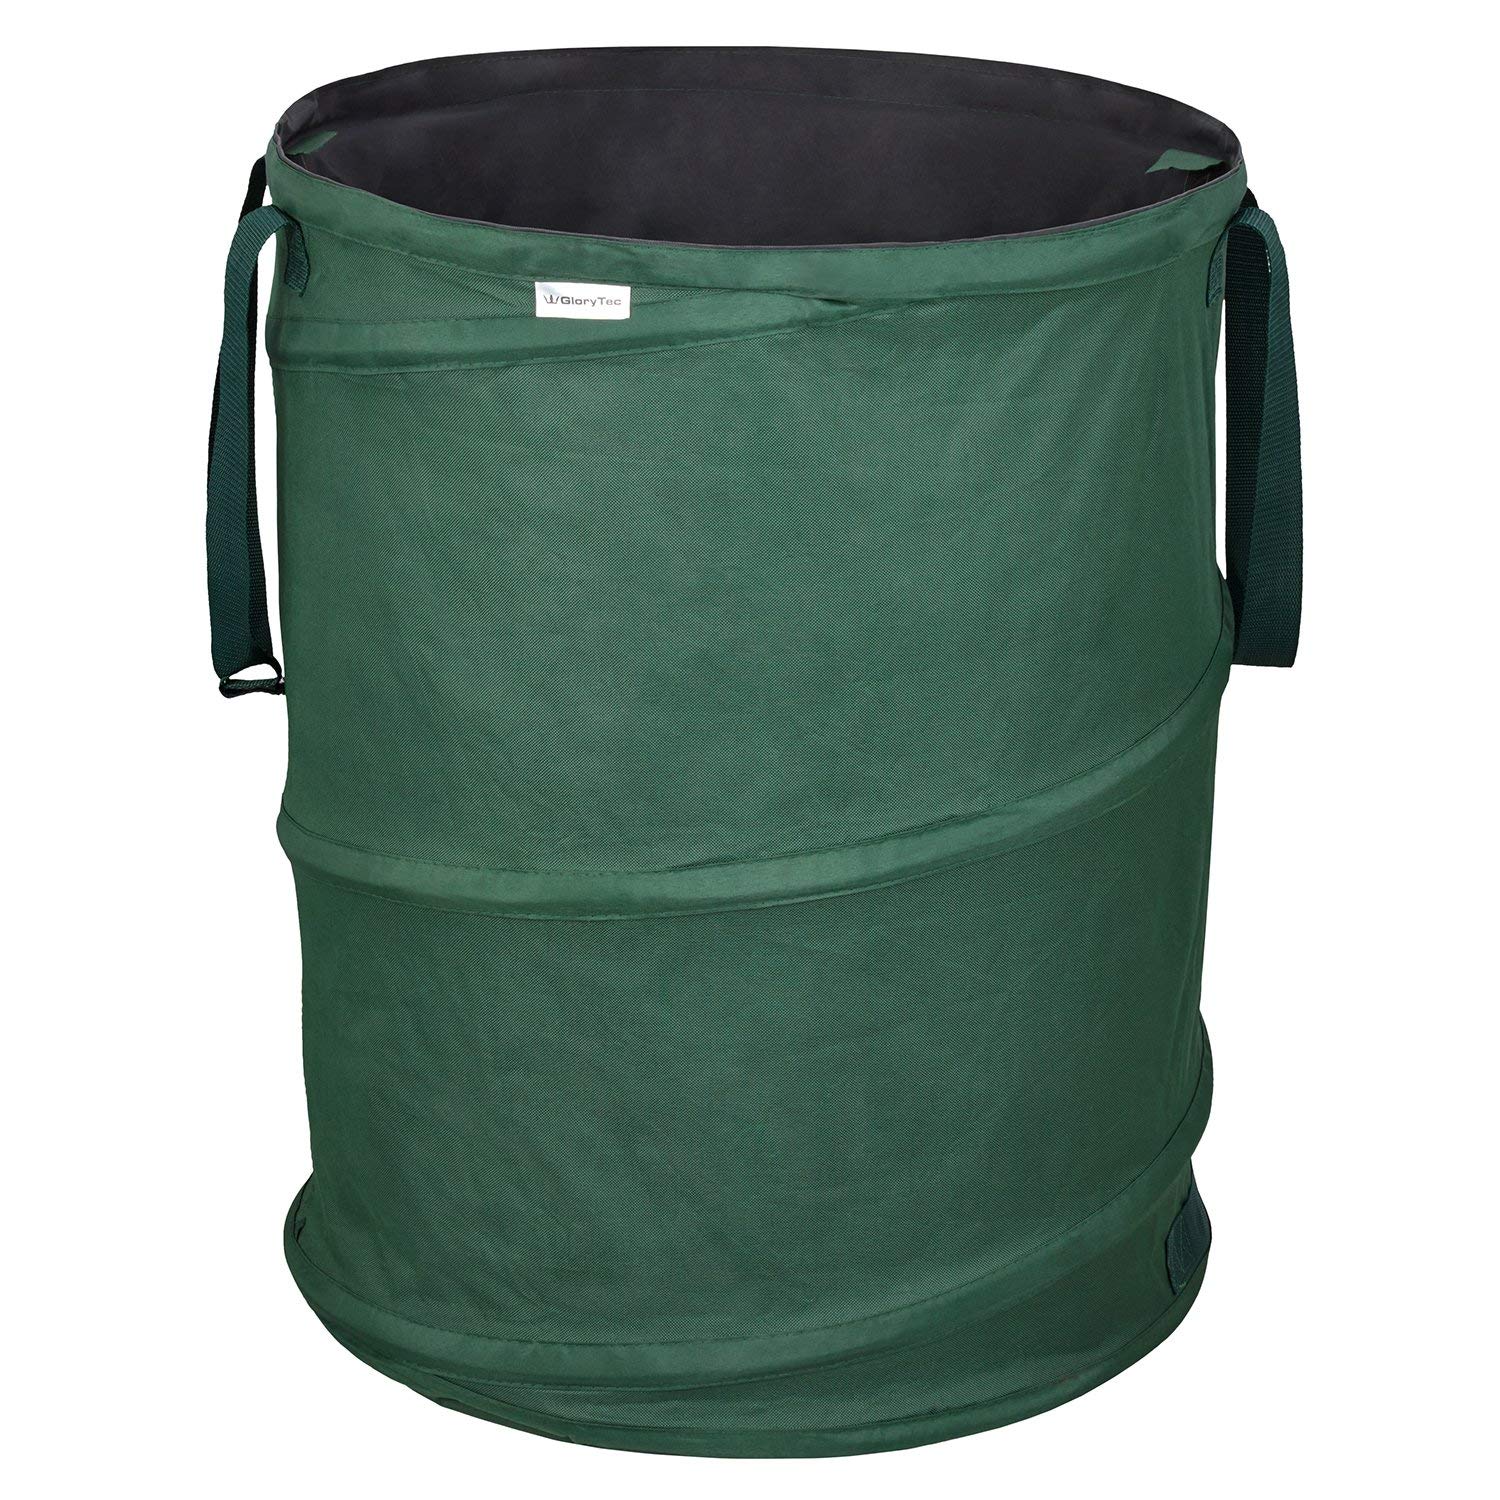 AIOIAI Garden Bags 45 Gallons Each - Collapsible Self-Erecting Gardening Bag - Comparative-Winner 2018 - Reusable Trash Can for Leaf, Lawn and Yard Waste - Premium Bagster with Spring Bucket 